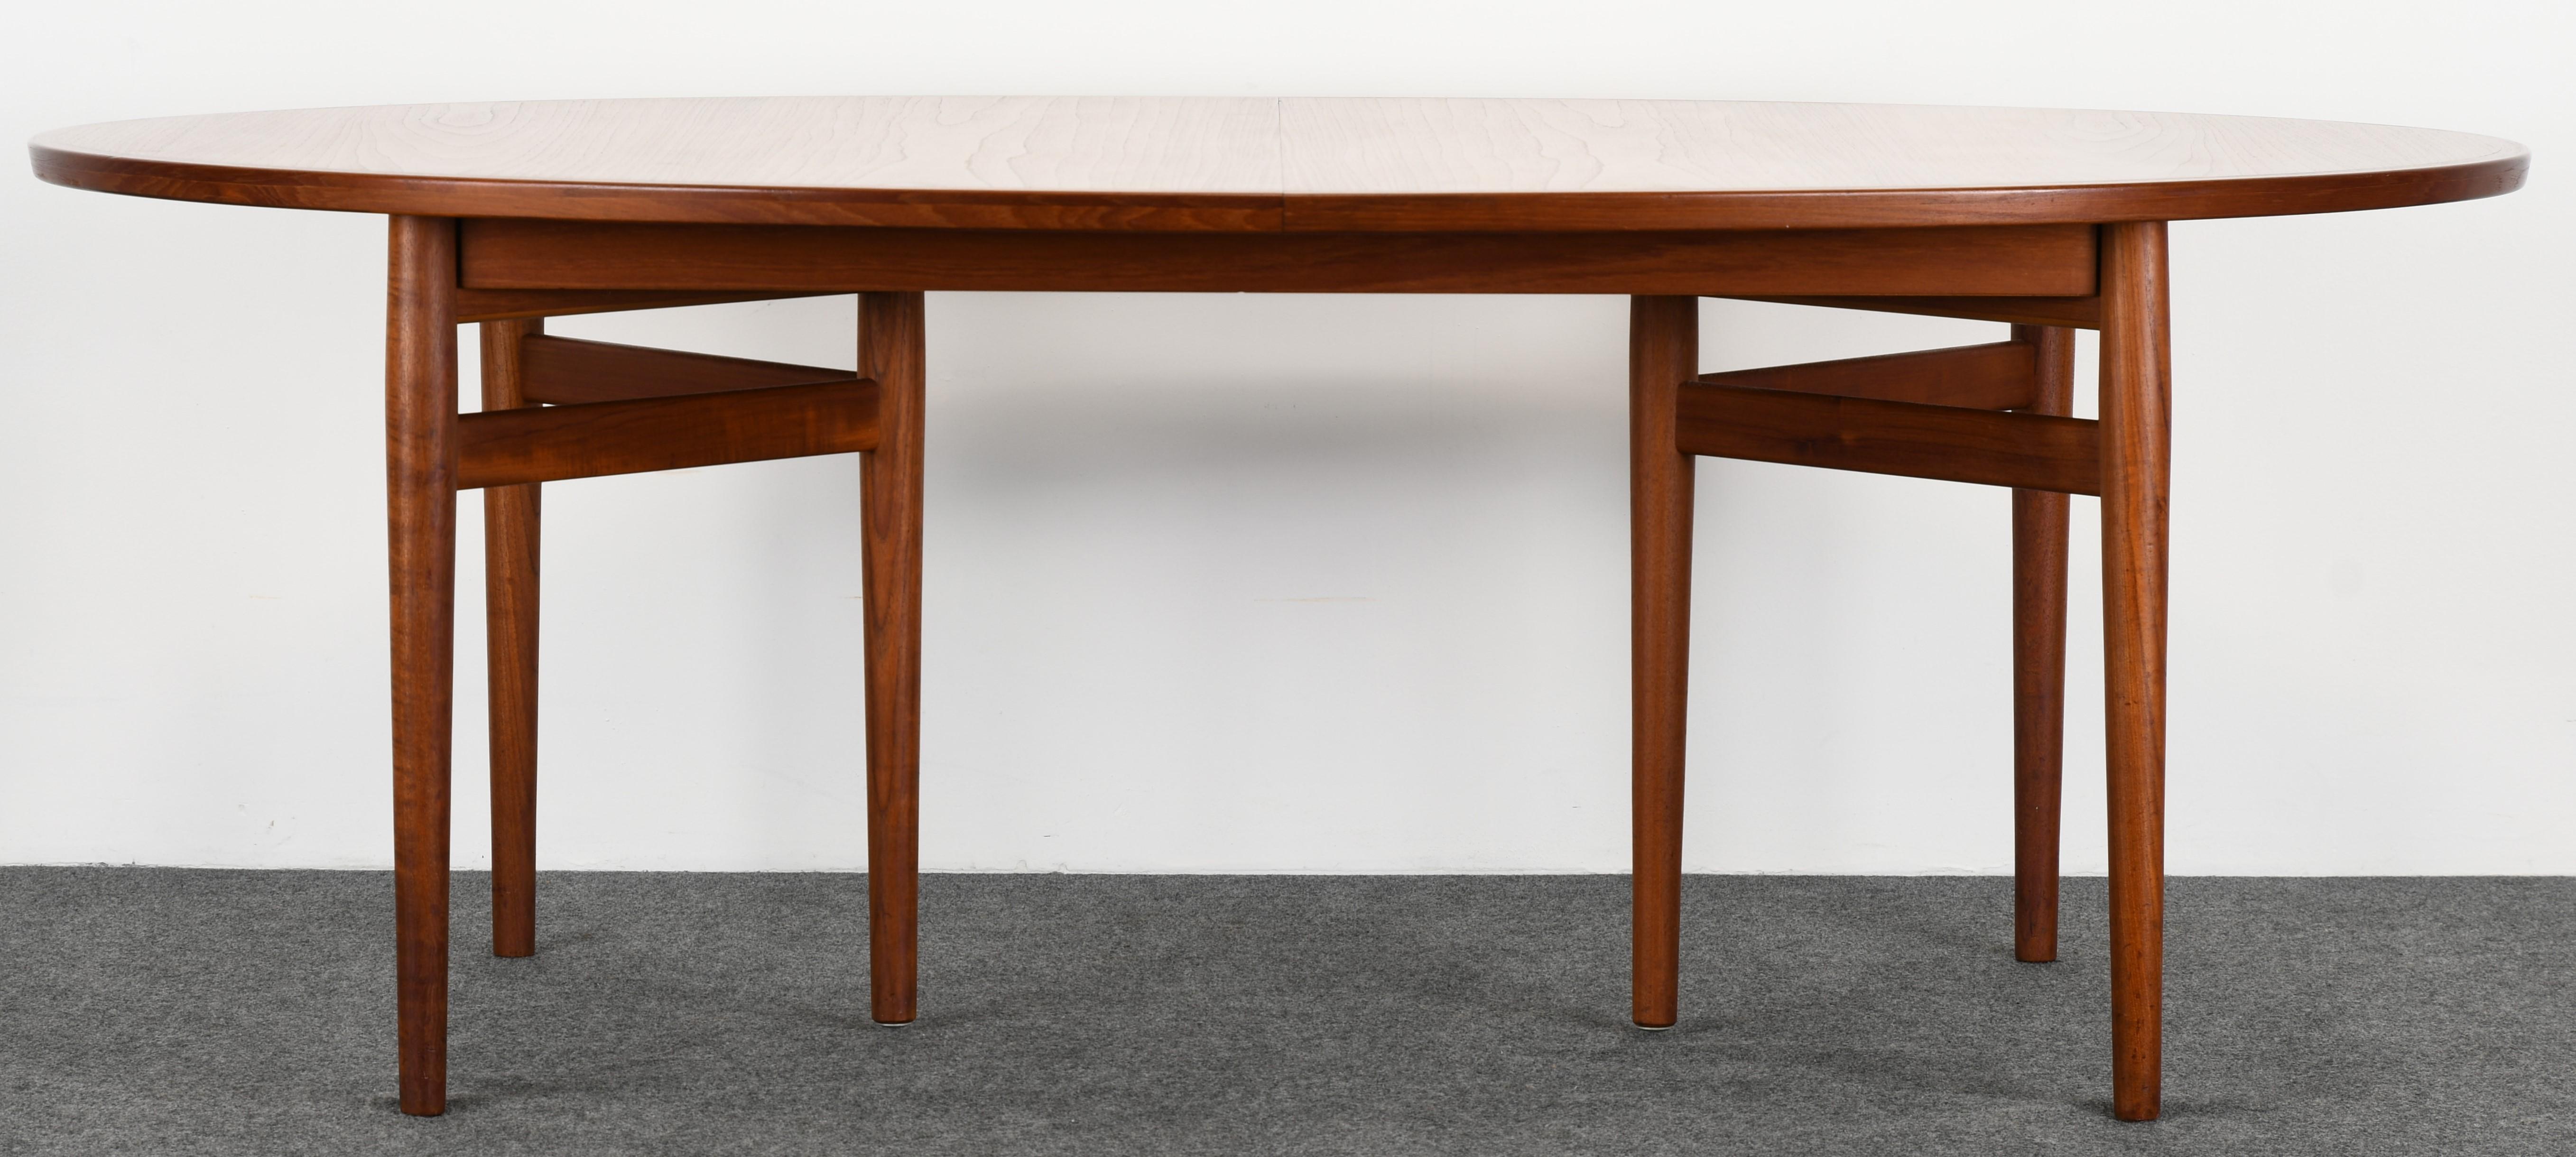 An elegant Scandinavian Modern teak dining table model 212 by Arne Vodder for Sibast, 1950s. This table is structurally sound and is in very good condition. There are two leaves included.

Dimensions without leaves: 28.5